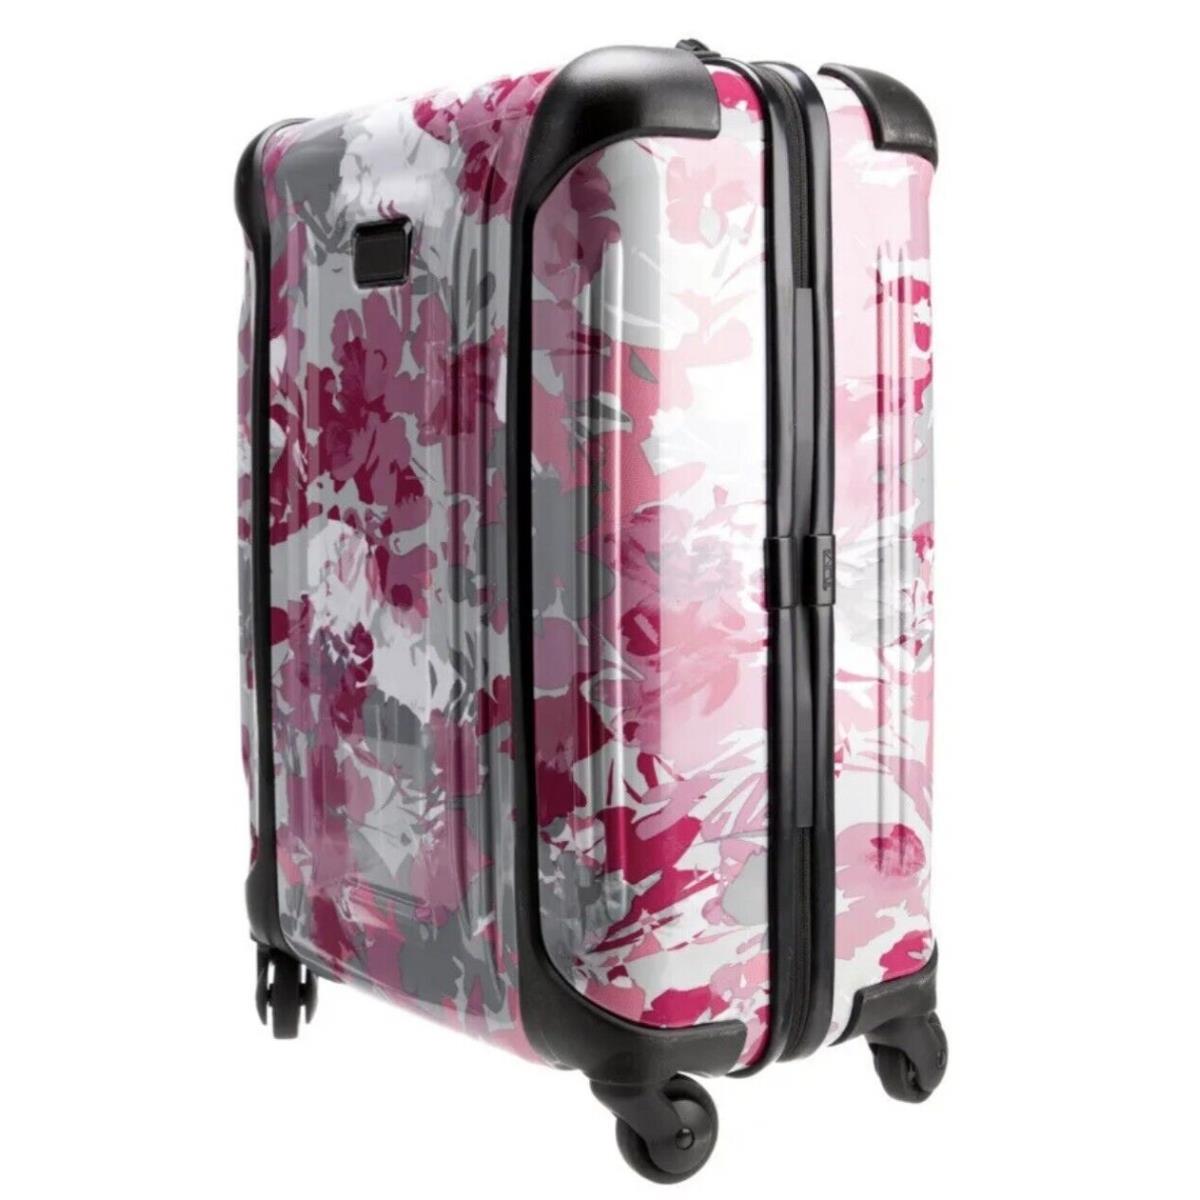 Tumi 32.5 Extended Trip Packing Case in Pink